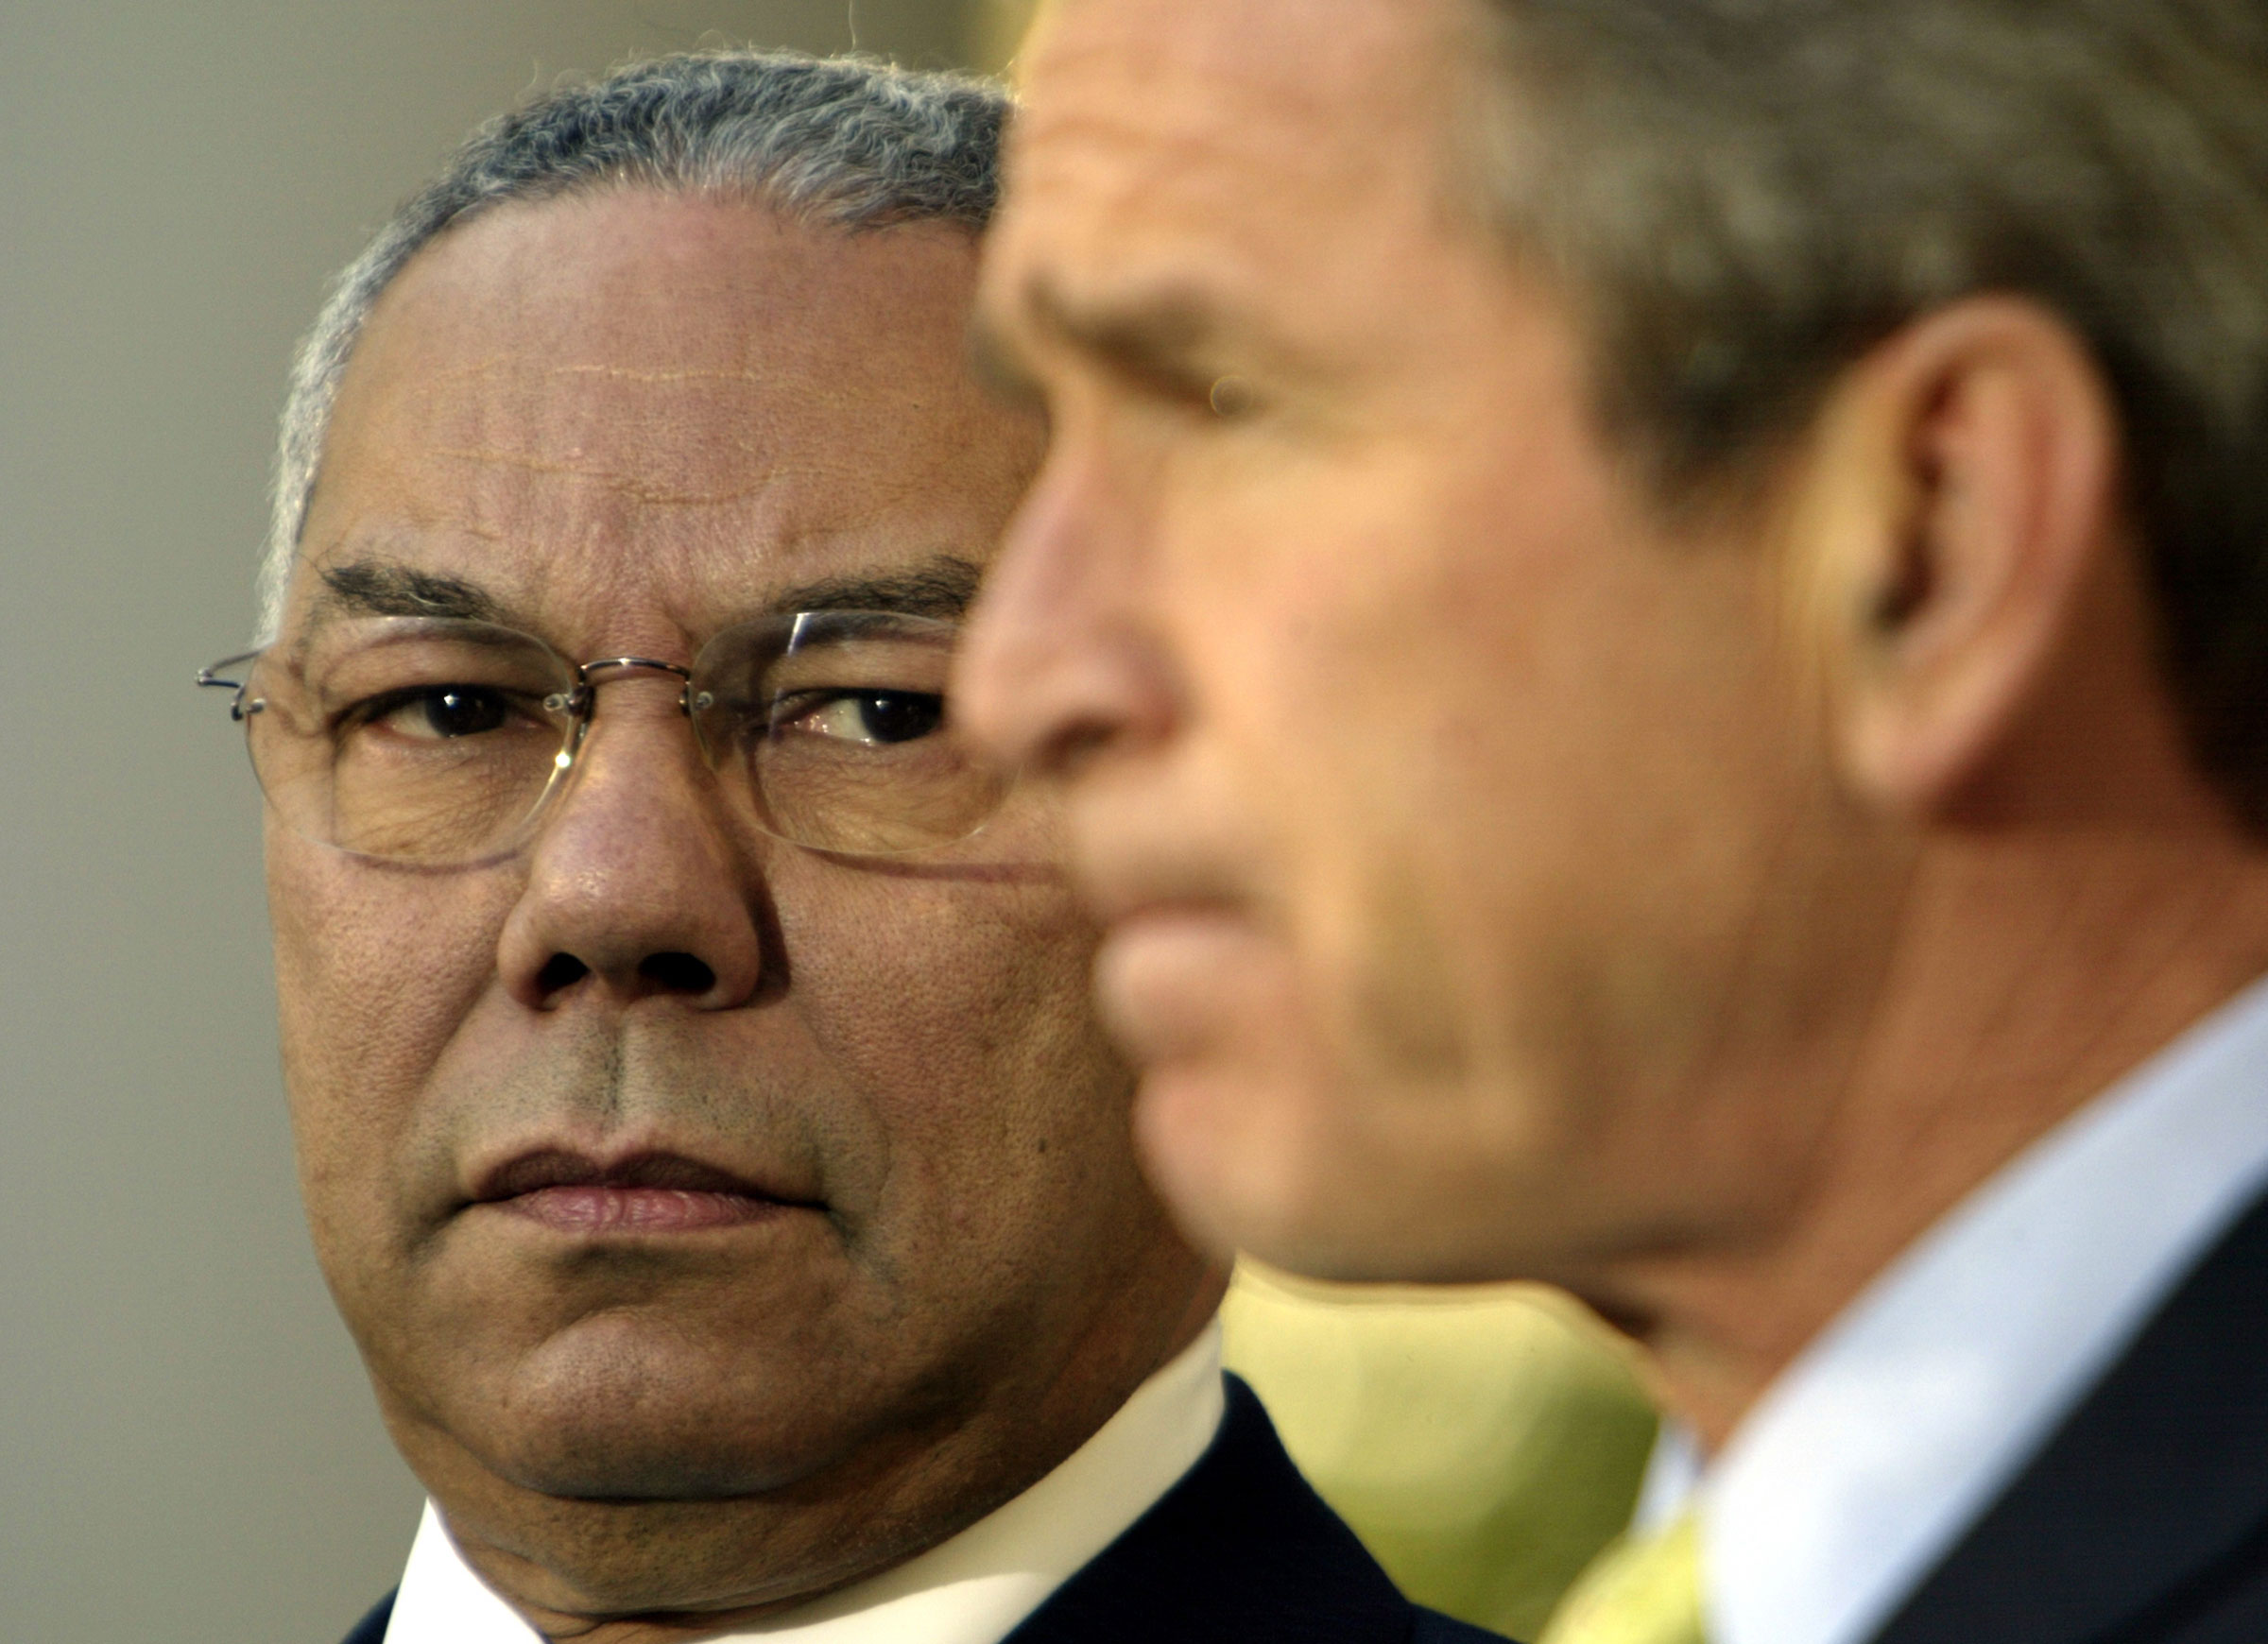 Secretary of State Colin Powell stands with President George W. Bush in 1990. (Brooks Kraft—Corbis/Getty Images)